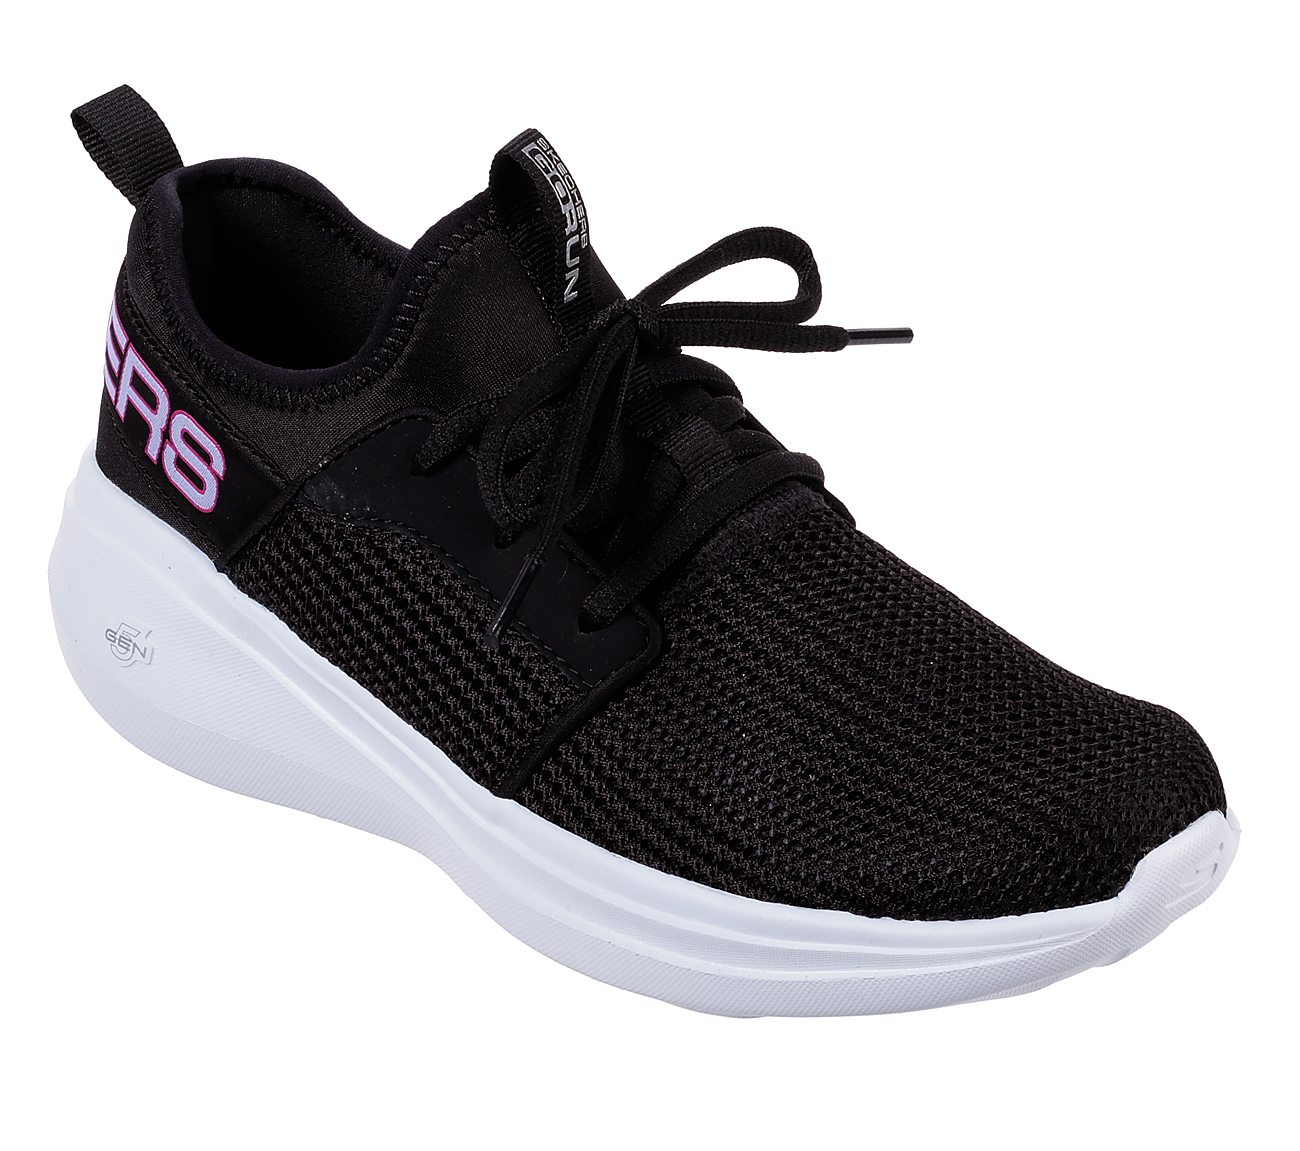 GO RUN FAST-VALOR, BLACK/PINK Footwear Lateral View